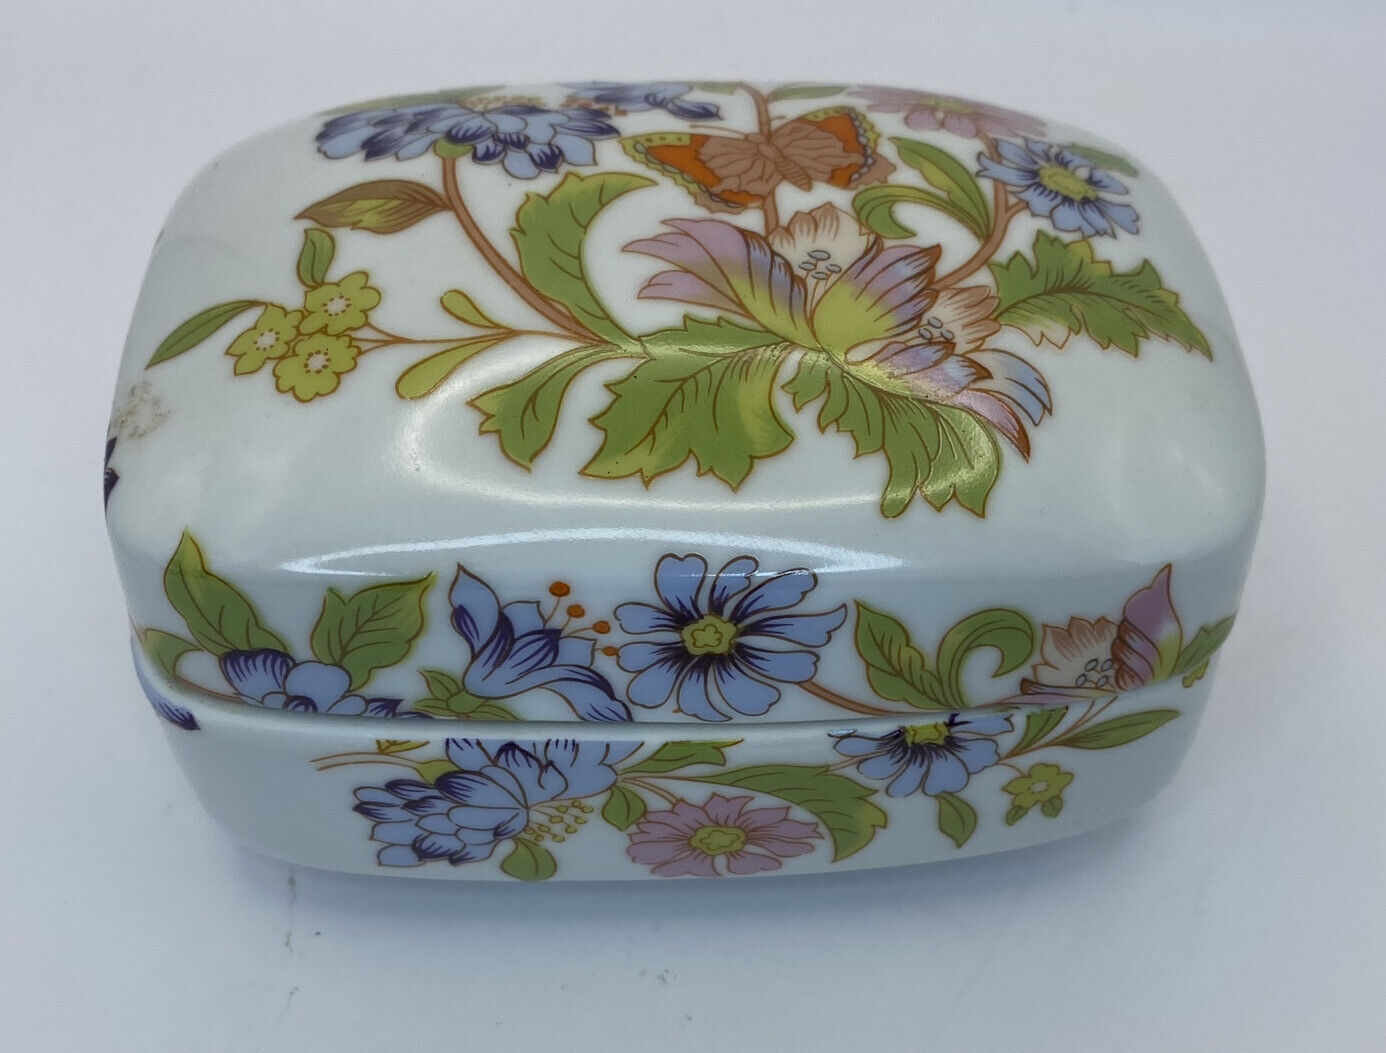 Vintage Porcelain Trinket Box By Mann -COUNTRY BUTTERFLY Pattern